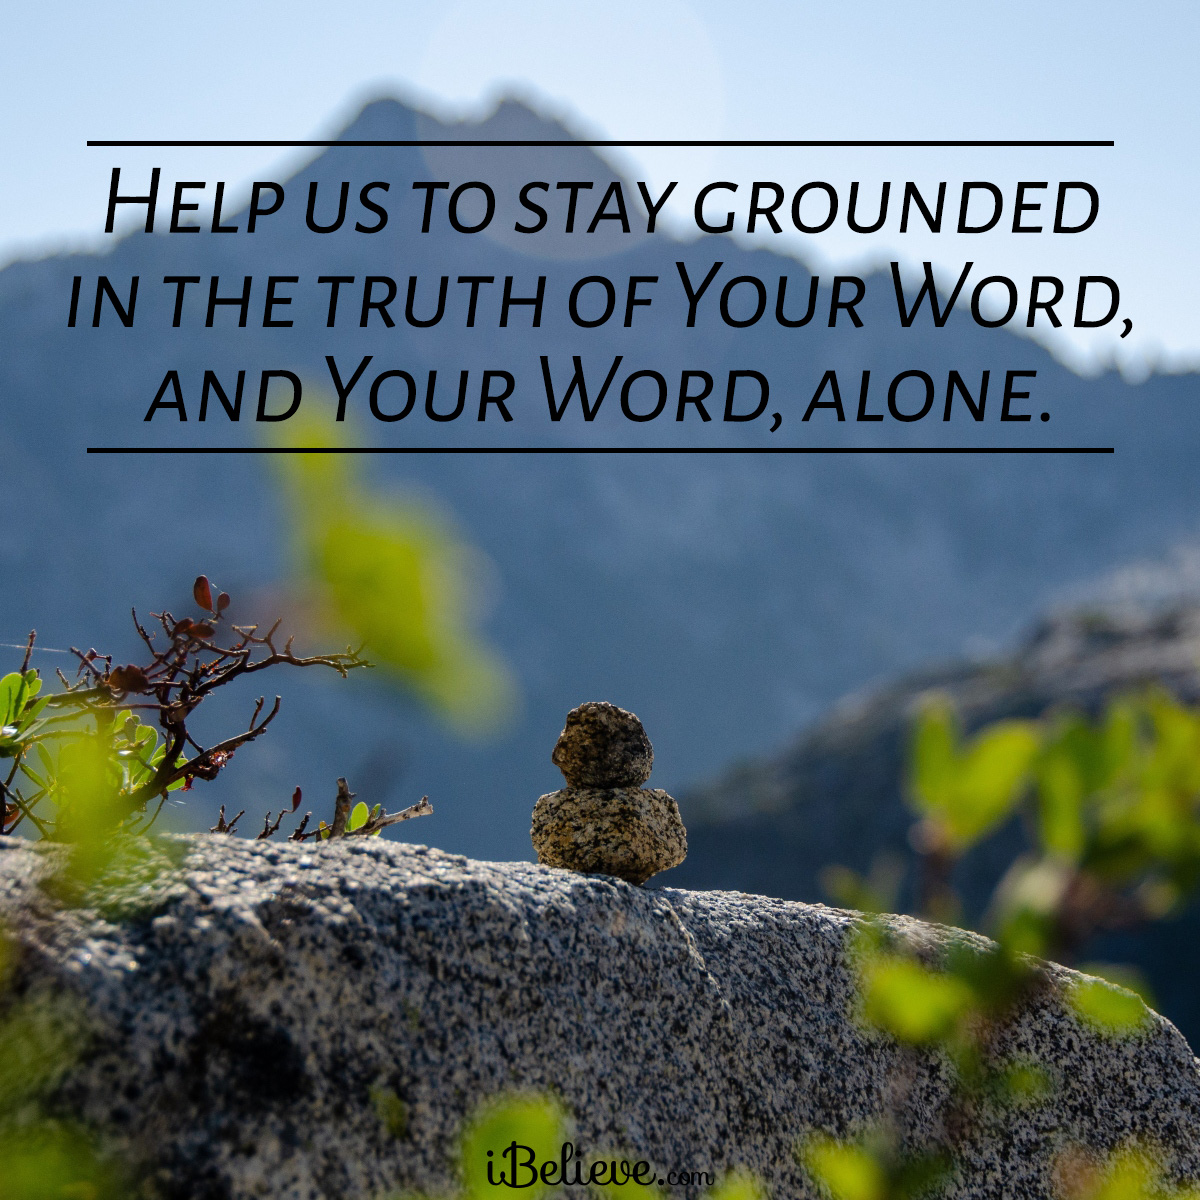 grounded in truth, inspirational image